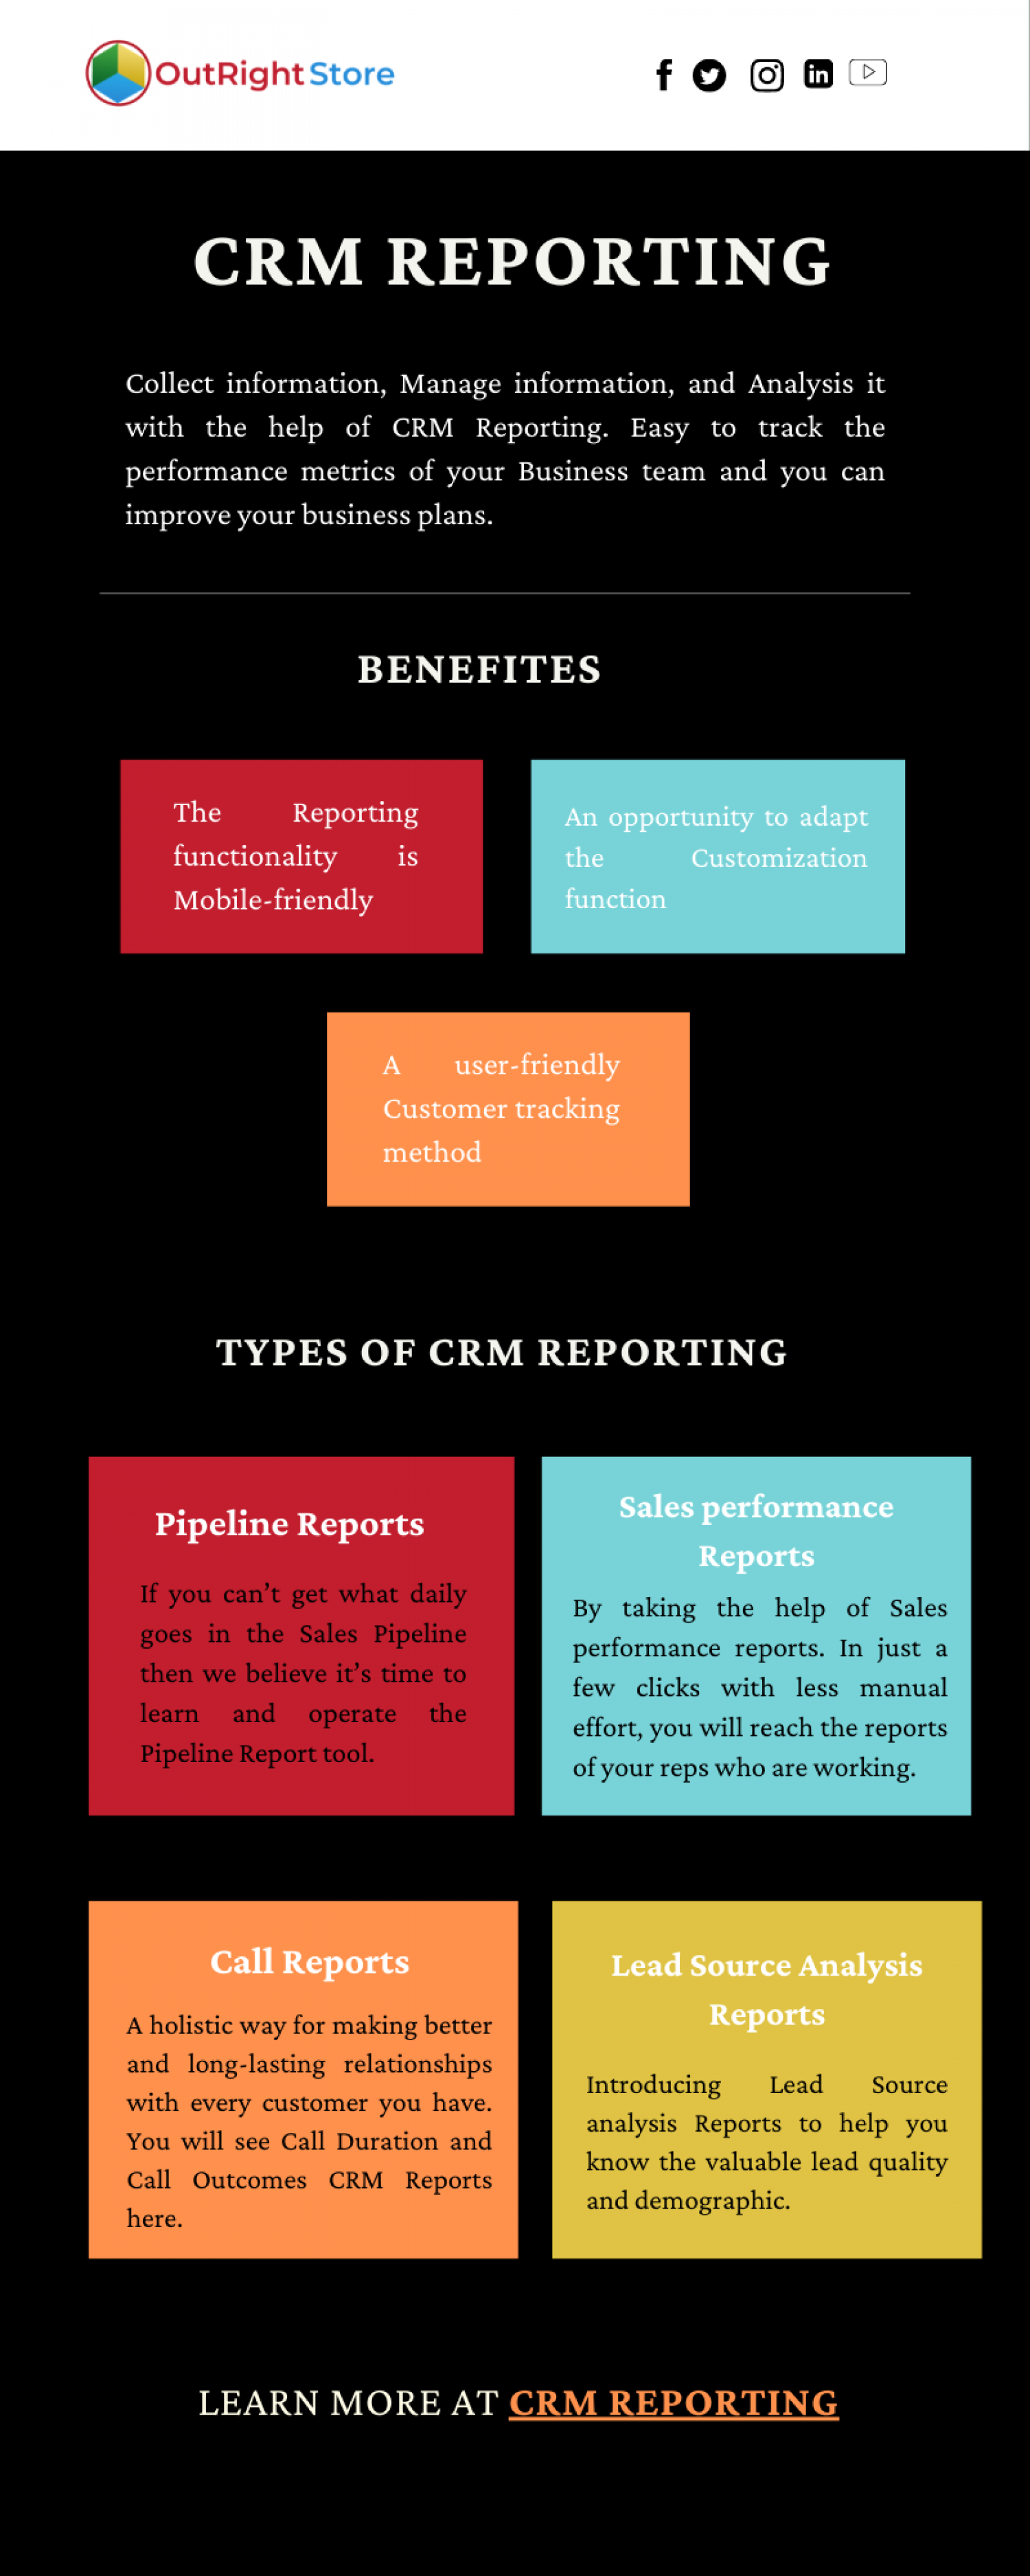 What is CRM Reporting and how does it work? Infographic